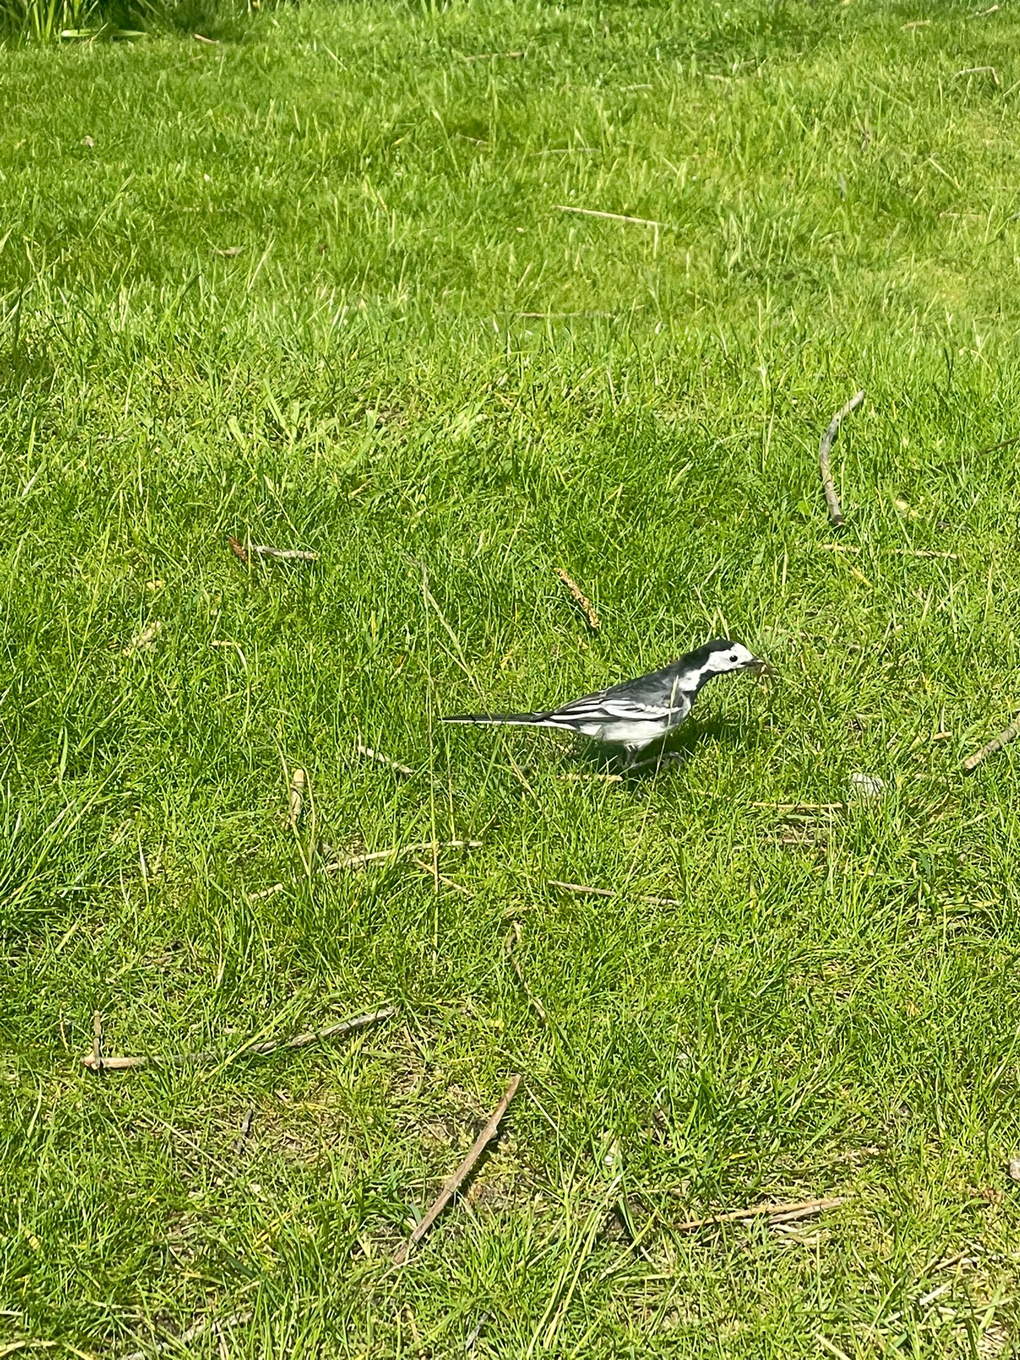 pied wagtail on a lawn